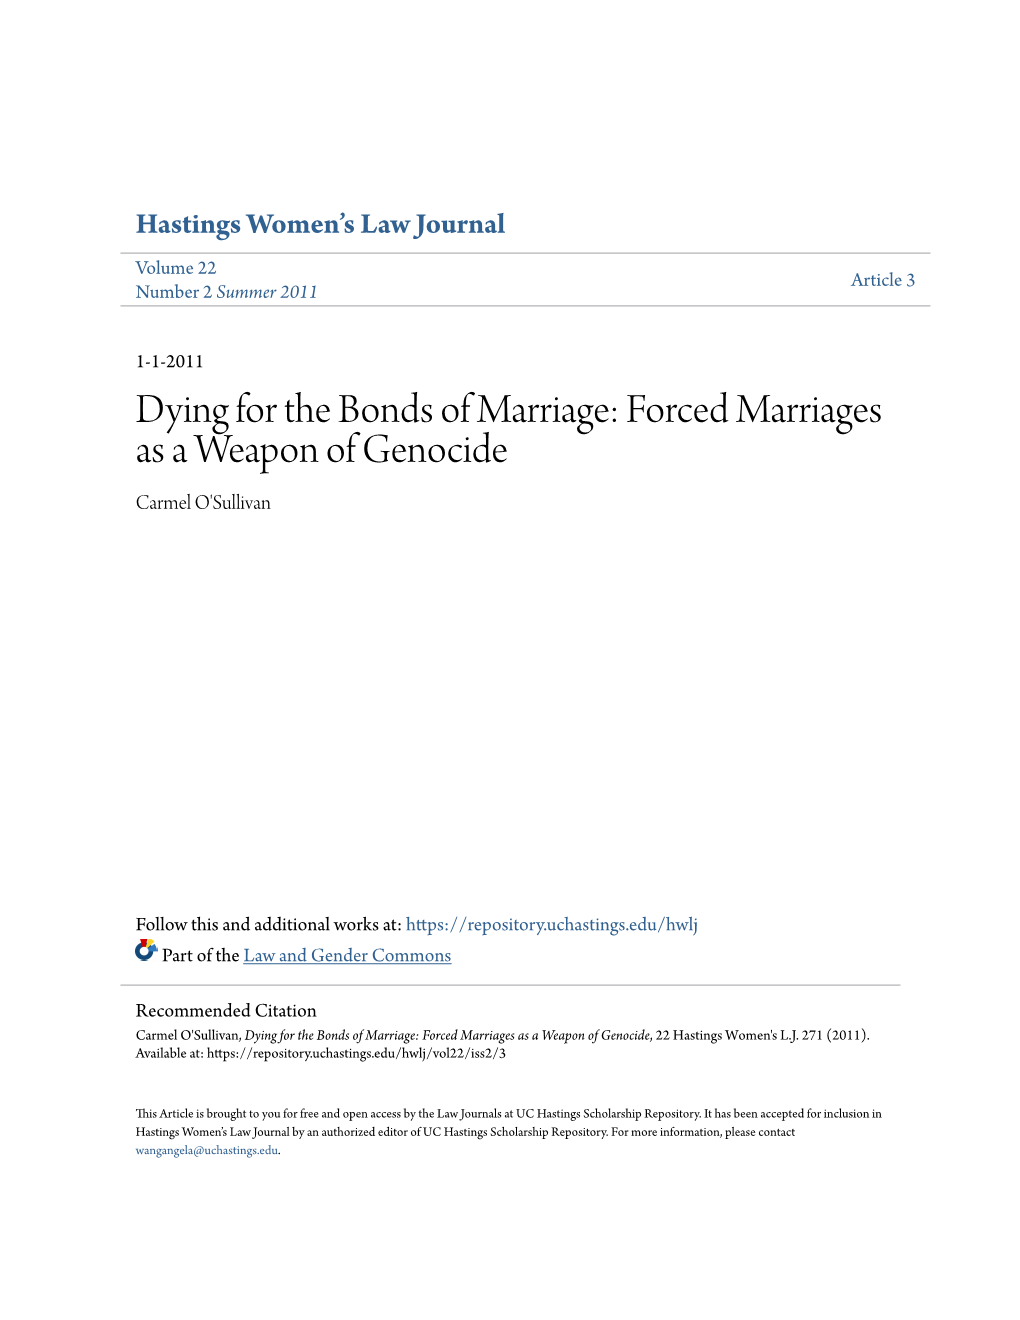 Forced Marriages As a Weapon of Genocide Carmel O'sullivan